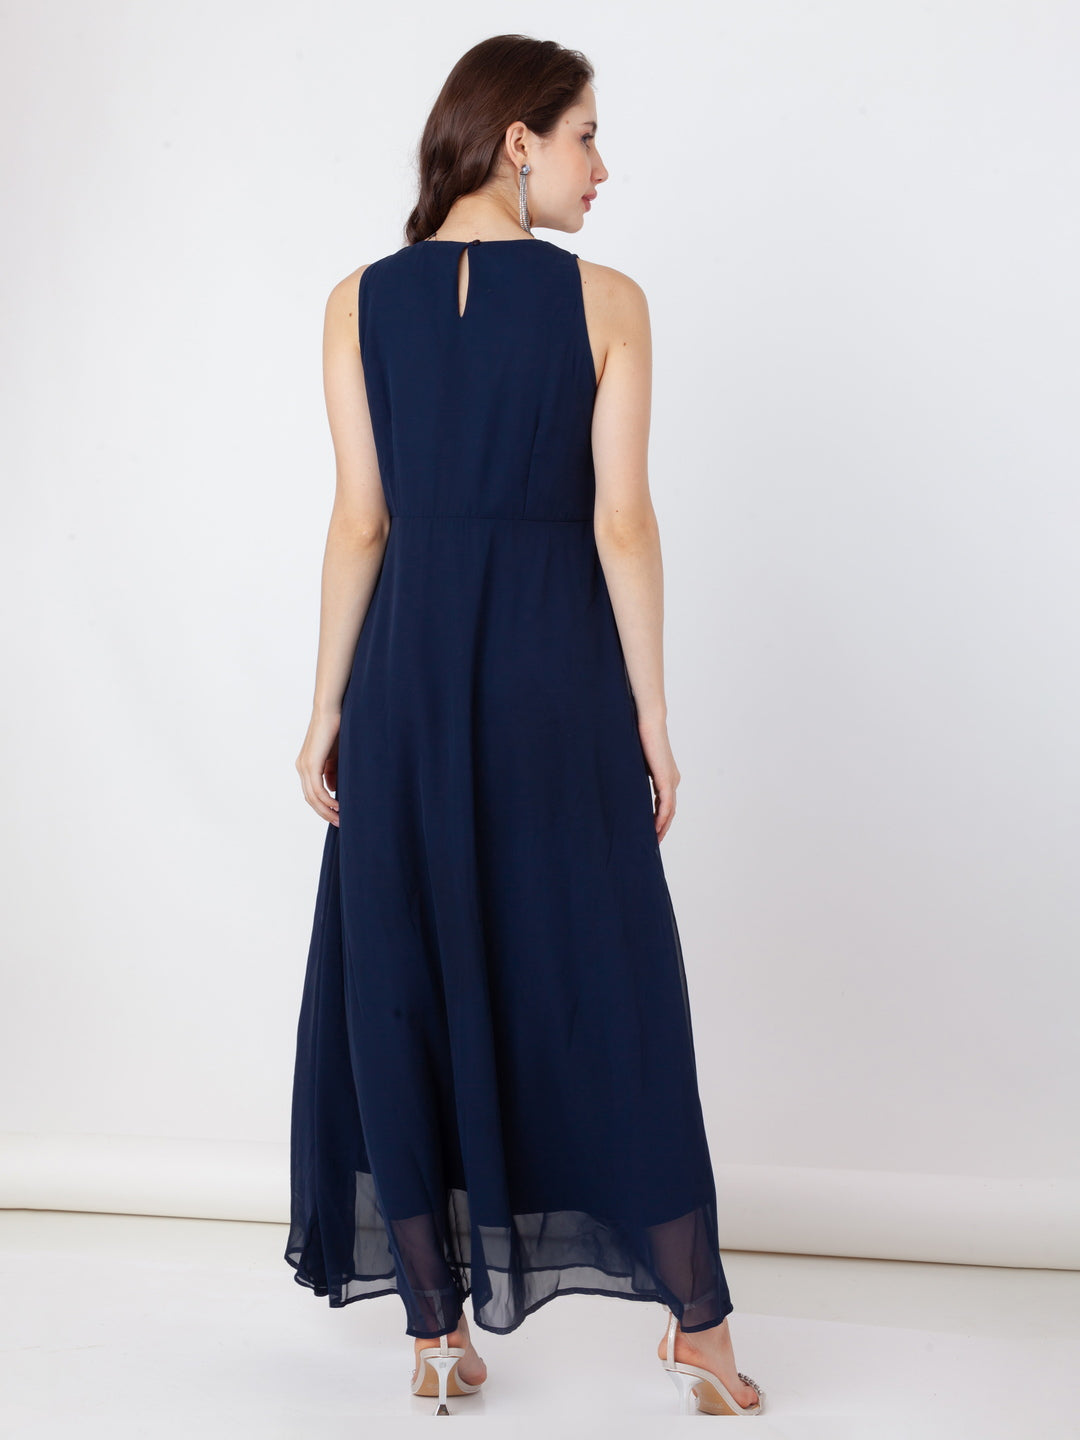 Blue_Embroidered_Flared_Maxi_Dress_4